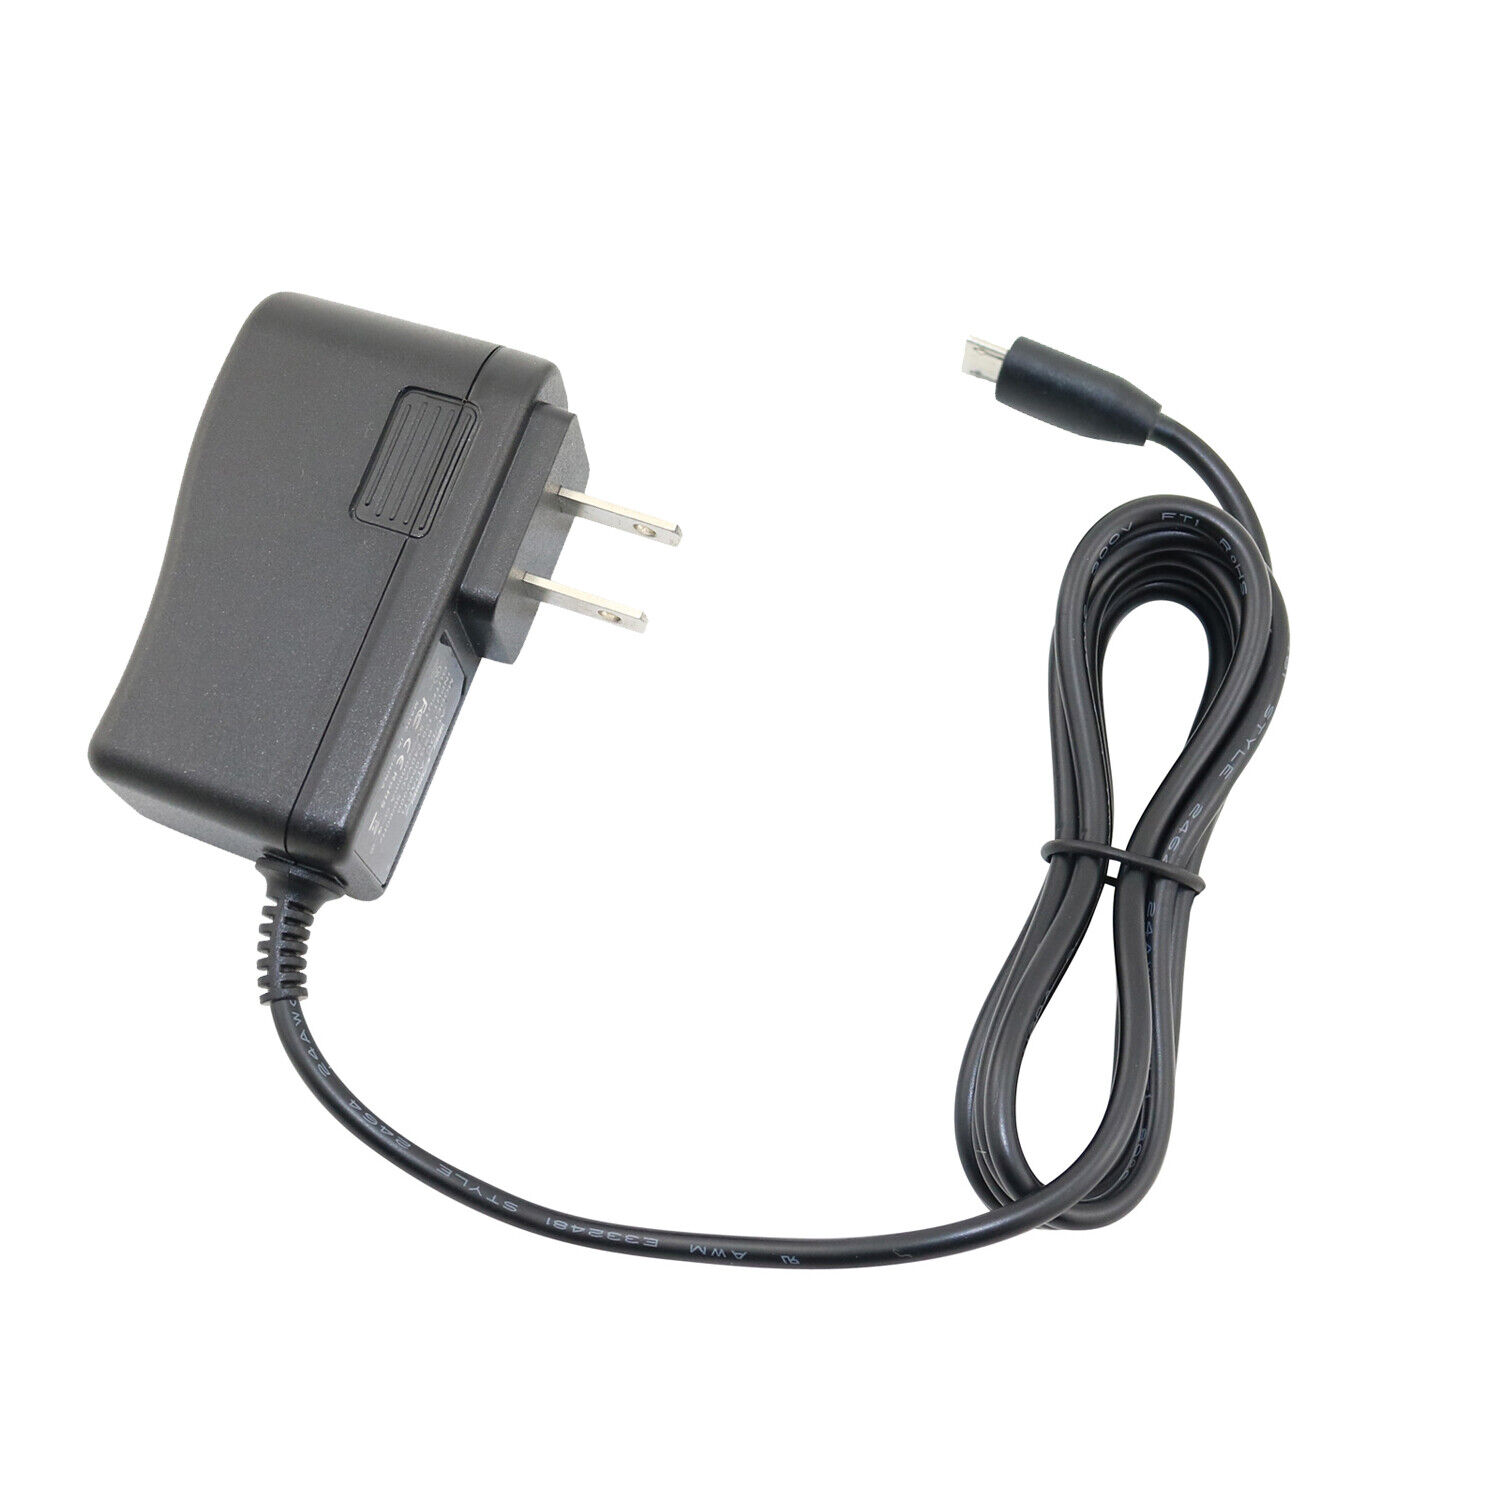 Charger for Fujifilm Instax Share SP-2 SP-3 AC/DC Adapter Power Supply Cord Type: Wall Charger Compatible Brand: Uni